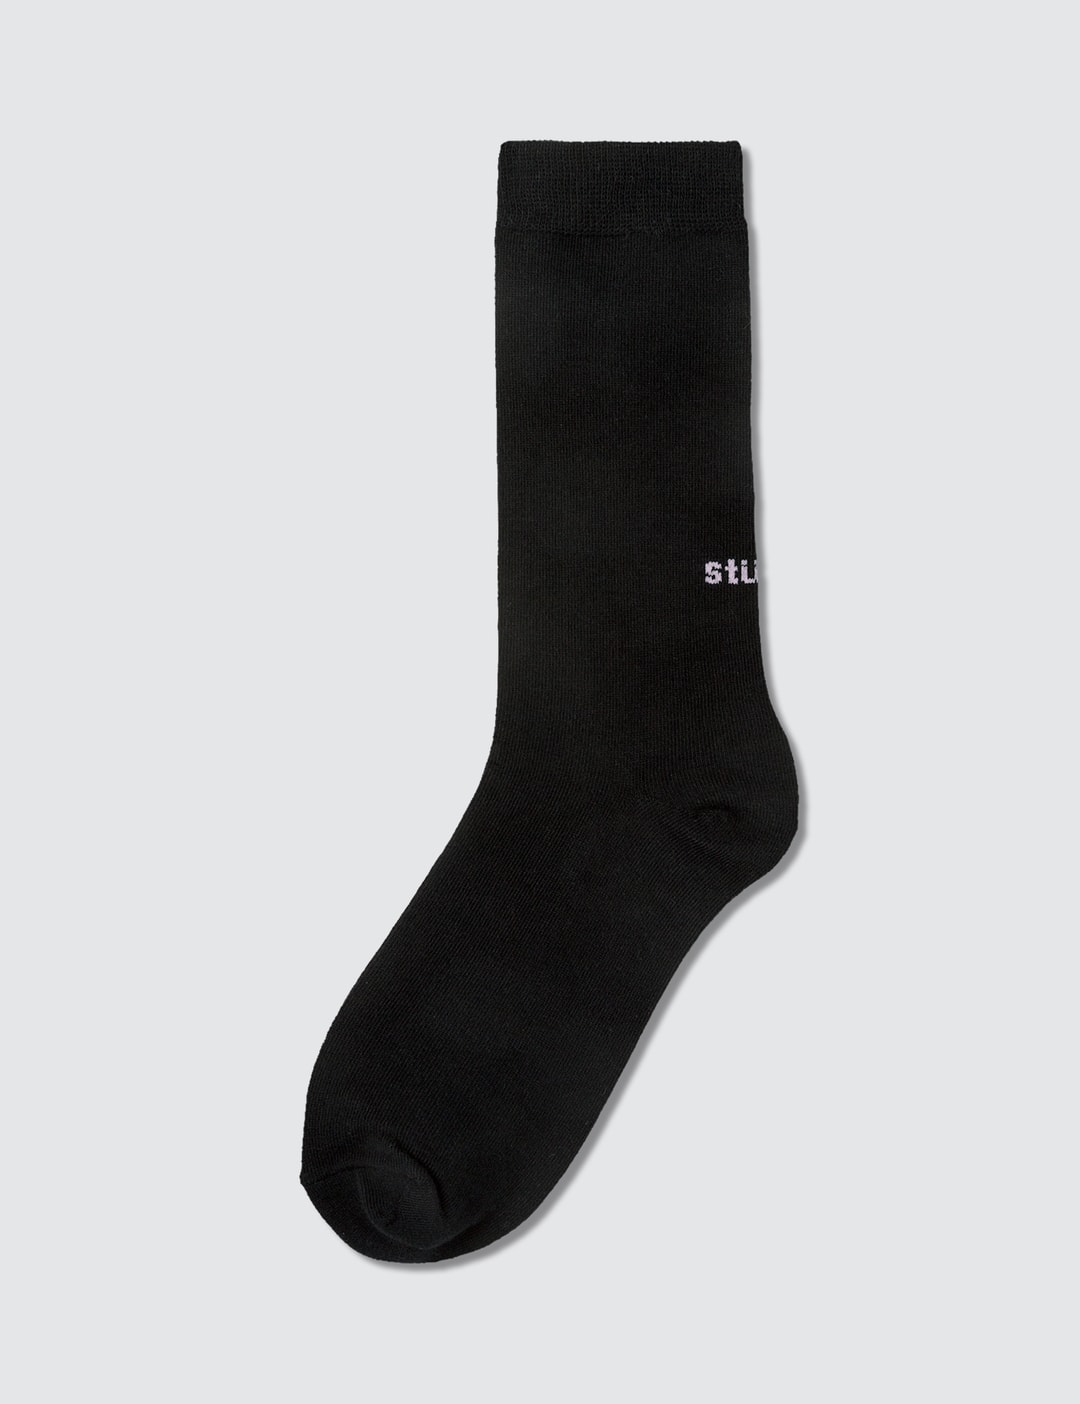 Stüssy - Everyday Socks | HBX - Globally Curated Fashion and Lifestyle ...